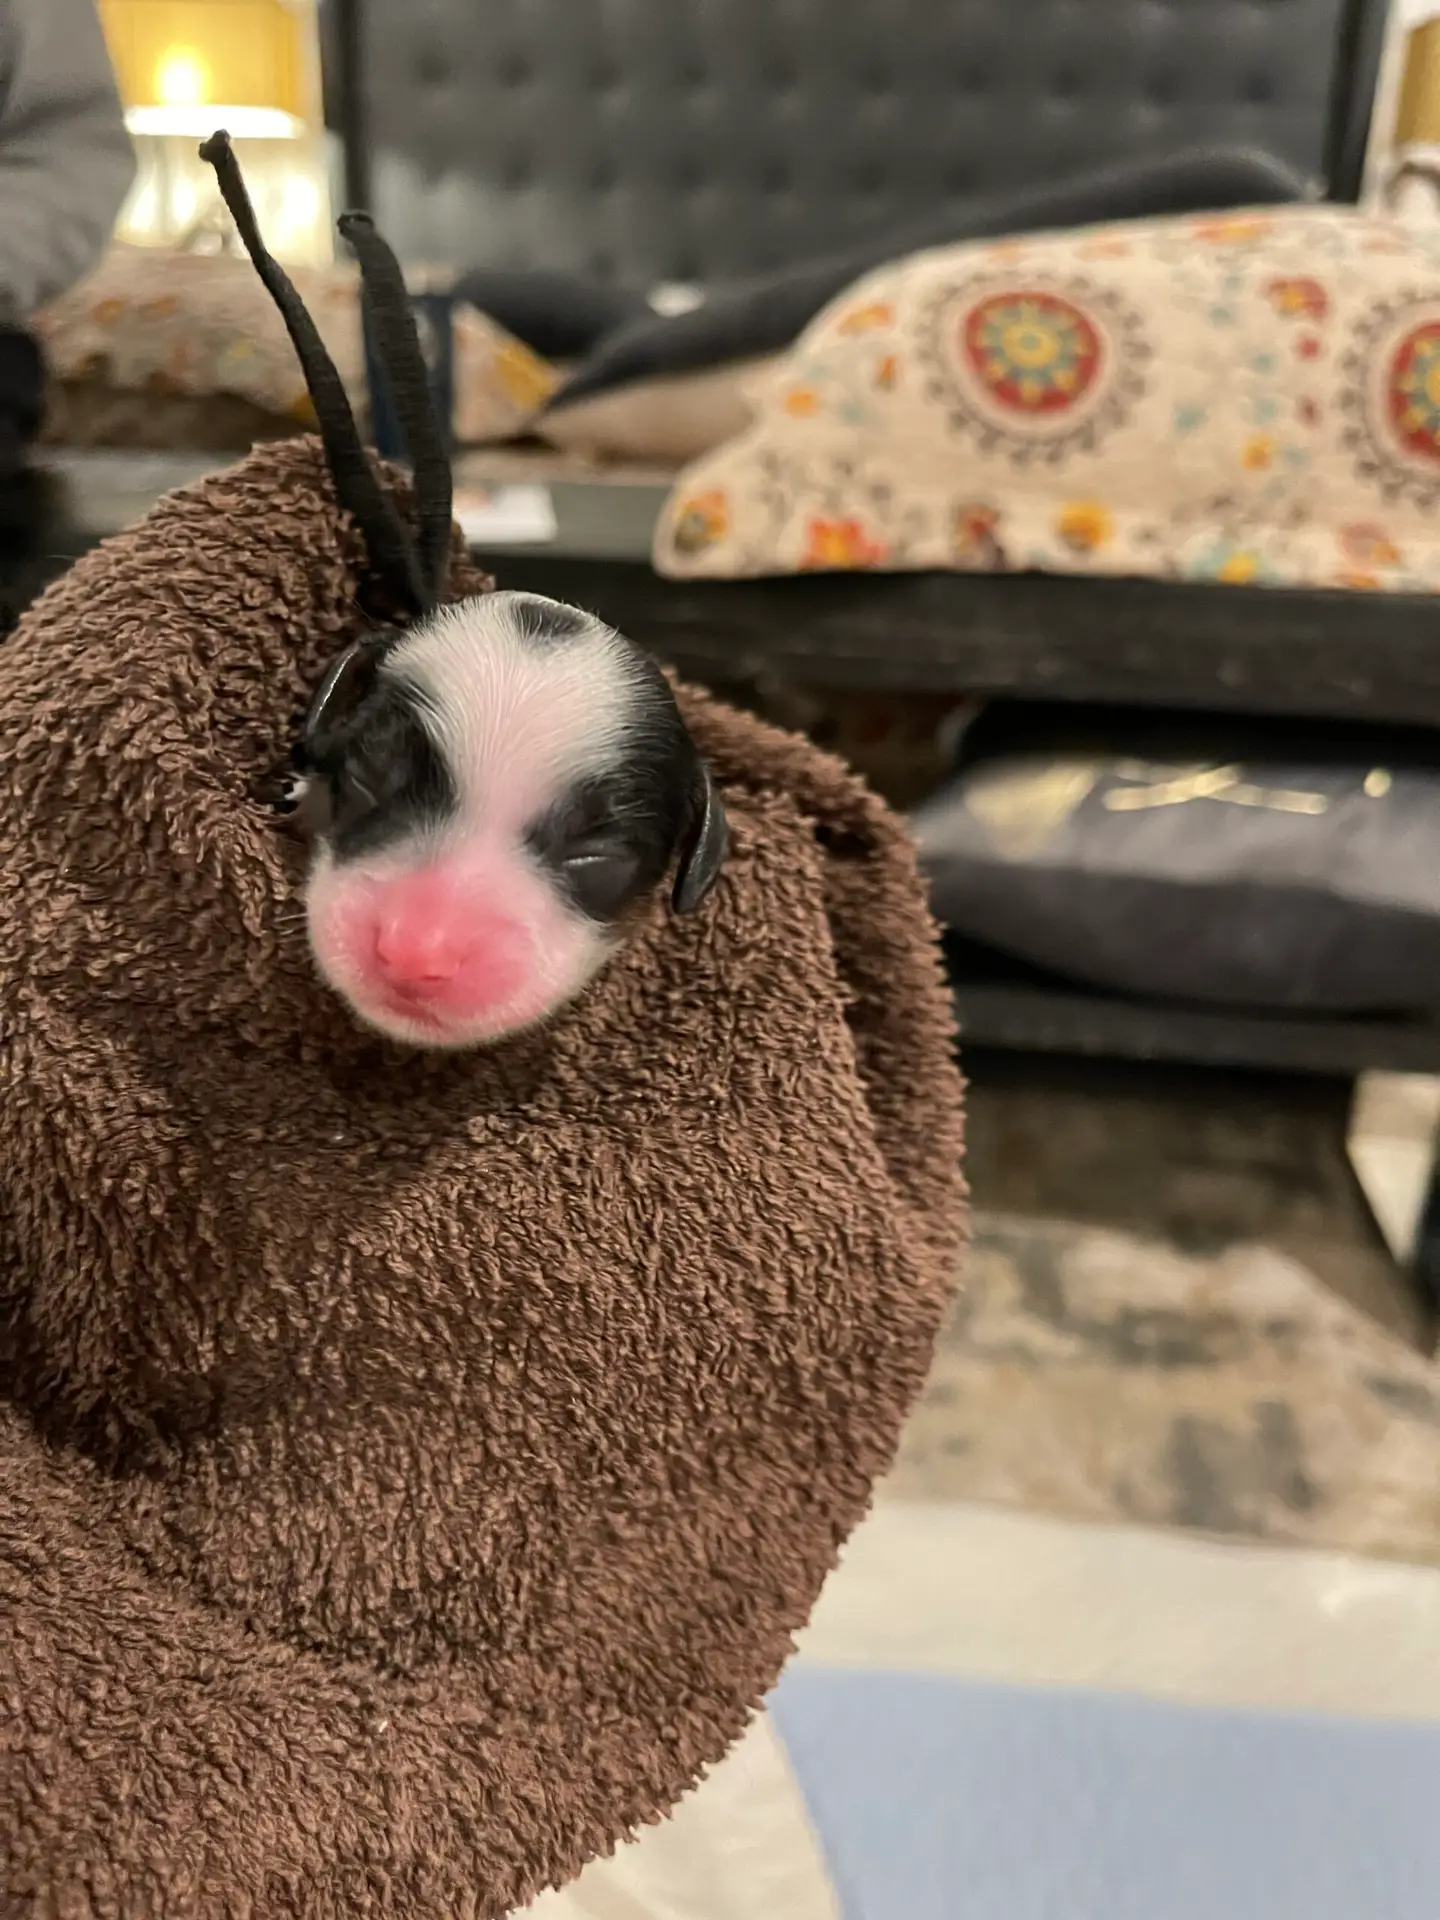 Black and White face of newborn puppy wrapped in a towel